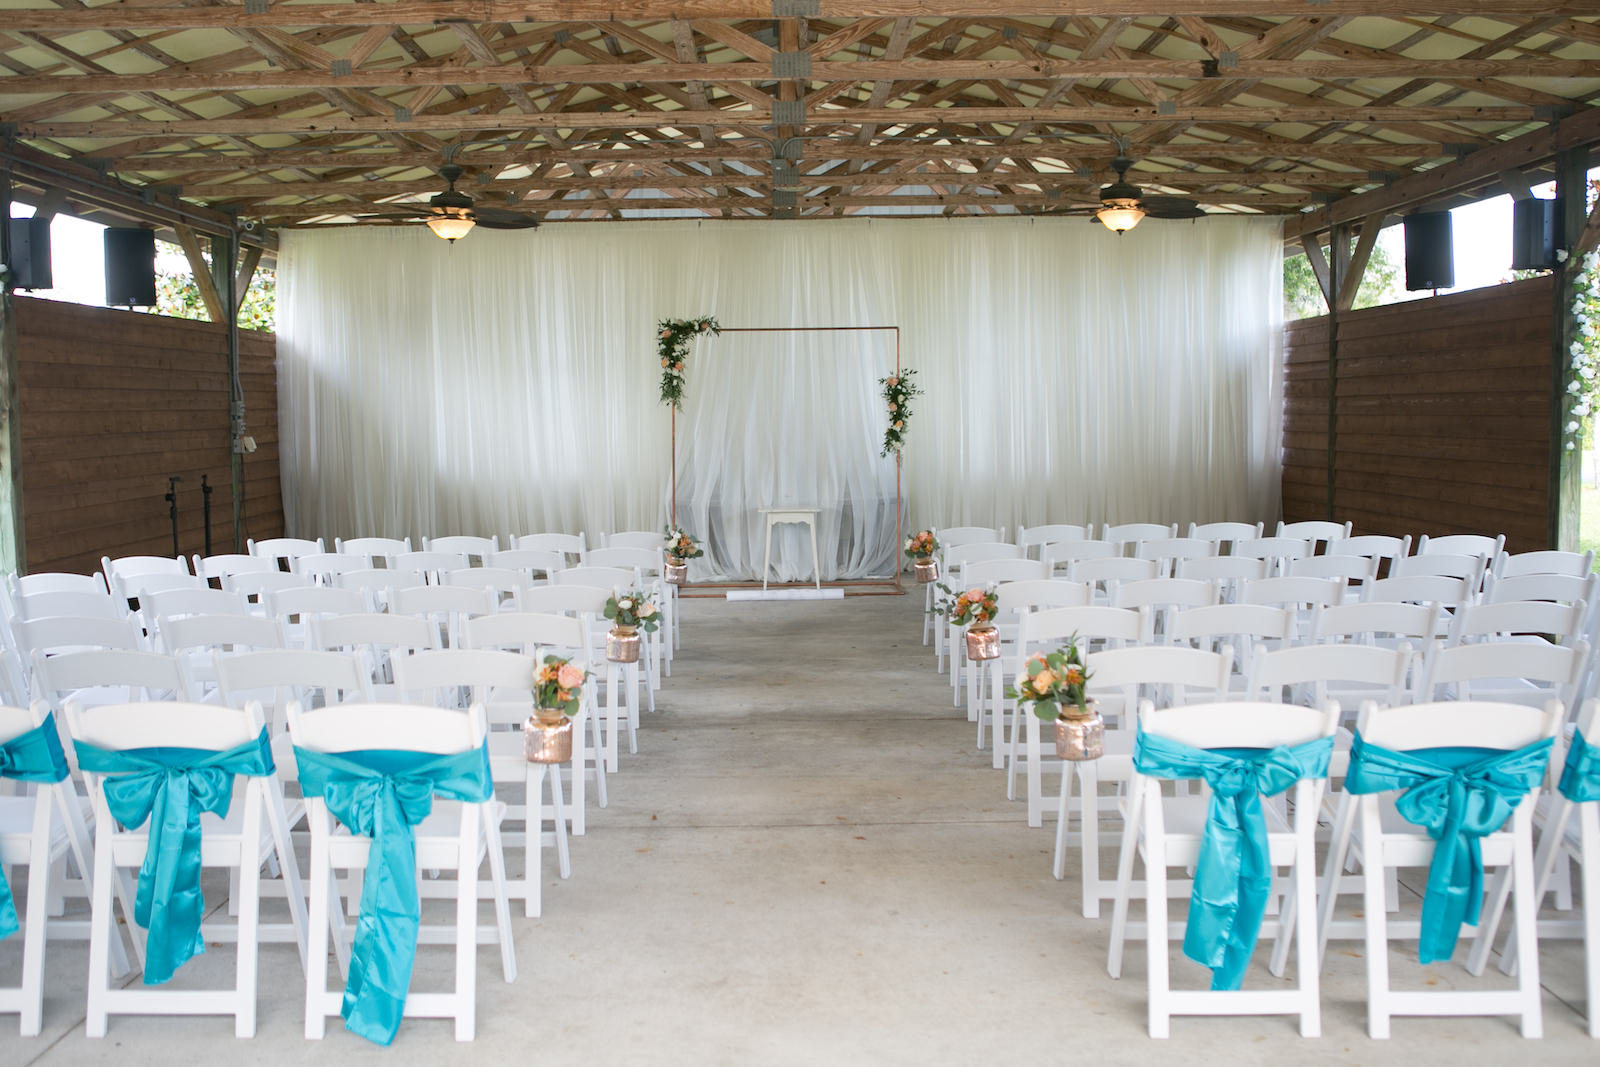 Simple Wedding Ceremony Decor, White Folding Chairs with Teal Blue Bows, Gold Mercury Jars with Floral Arrangements, Rectangular Copper Arch with Greenery Arrangements | Wedding Photographer Carrie Wildes Photography | Pinellas Park Wedding Venue Shahnasarian Hall | Wedding Linen Rentals Gabro Event Services